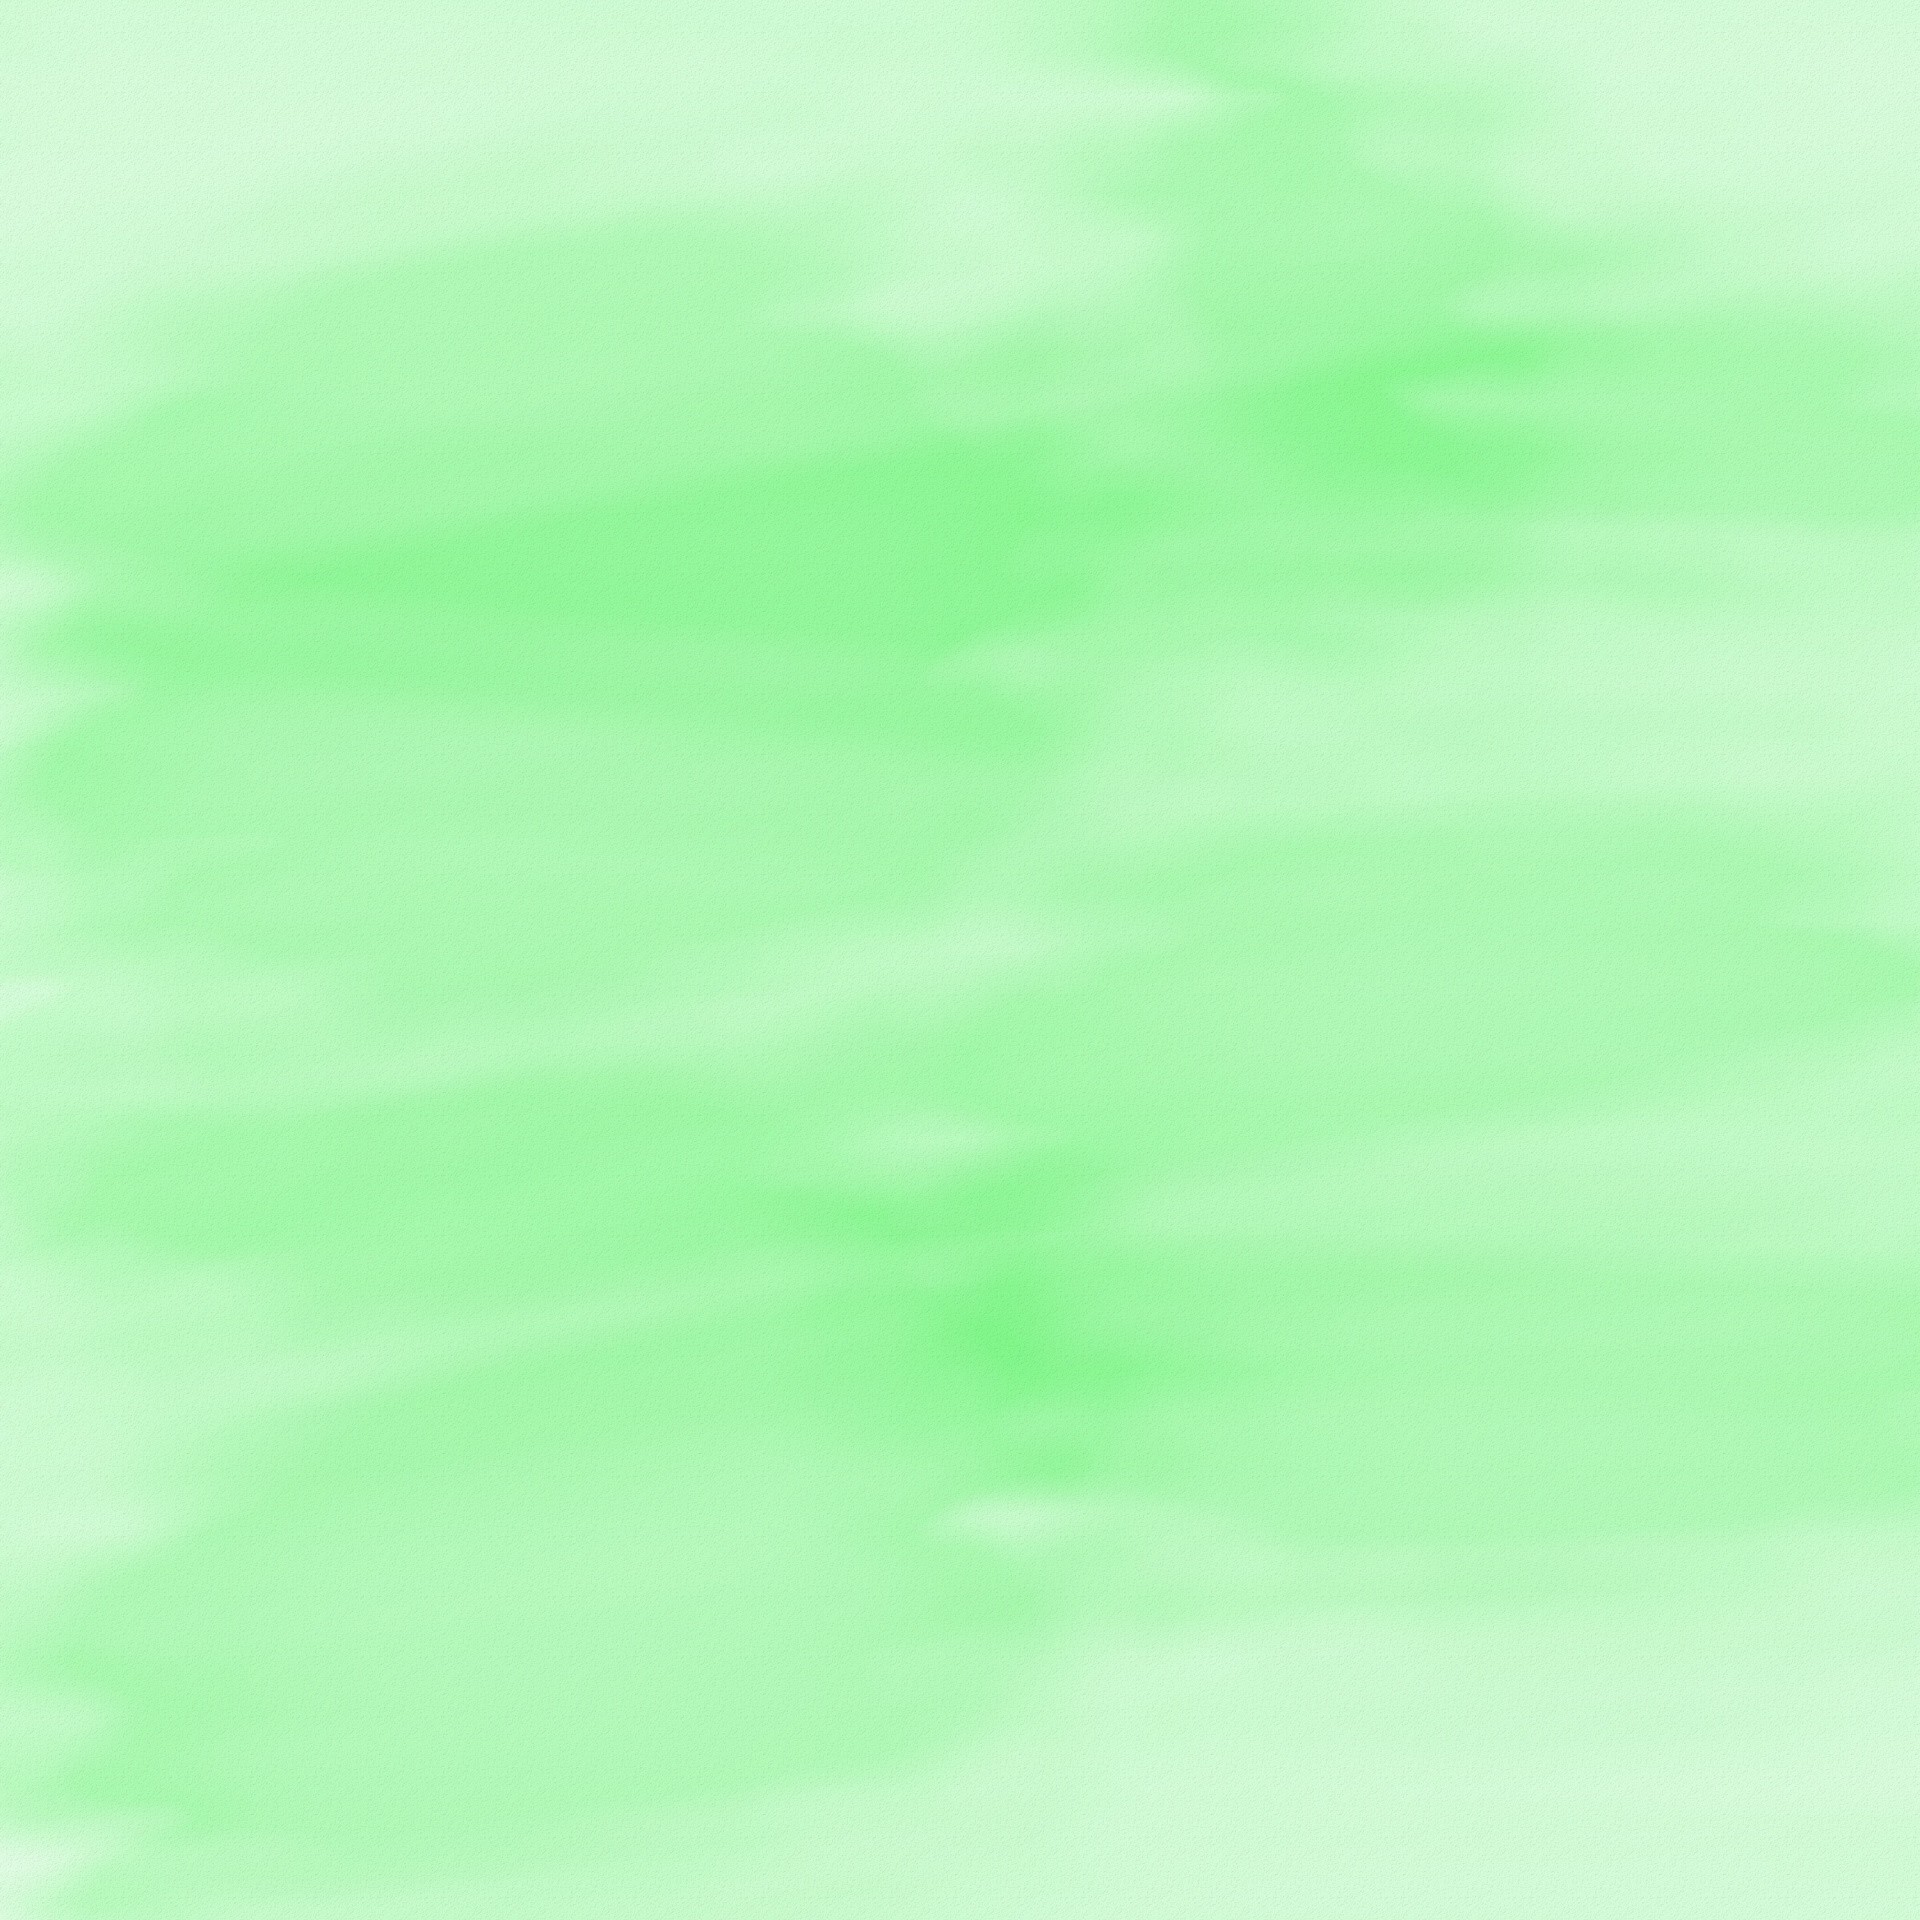 1920x1920 Watercolor Texture Background Green